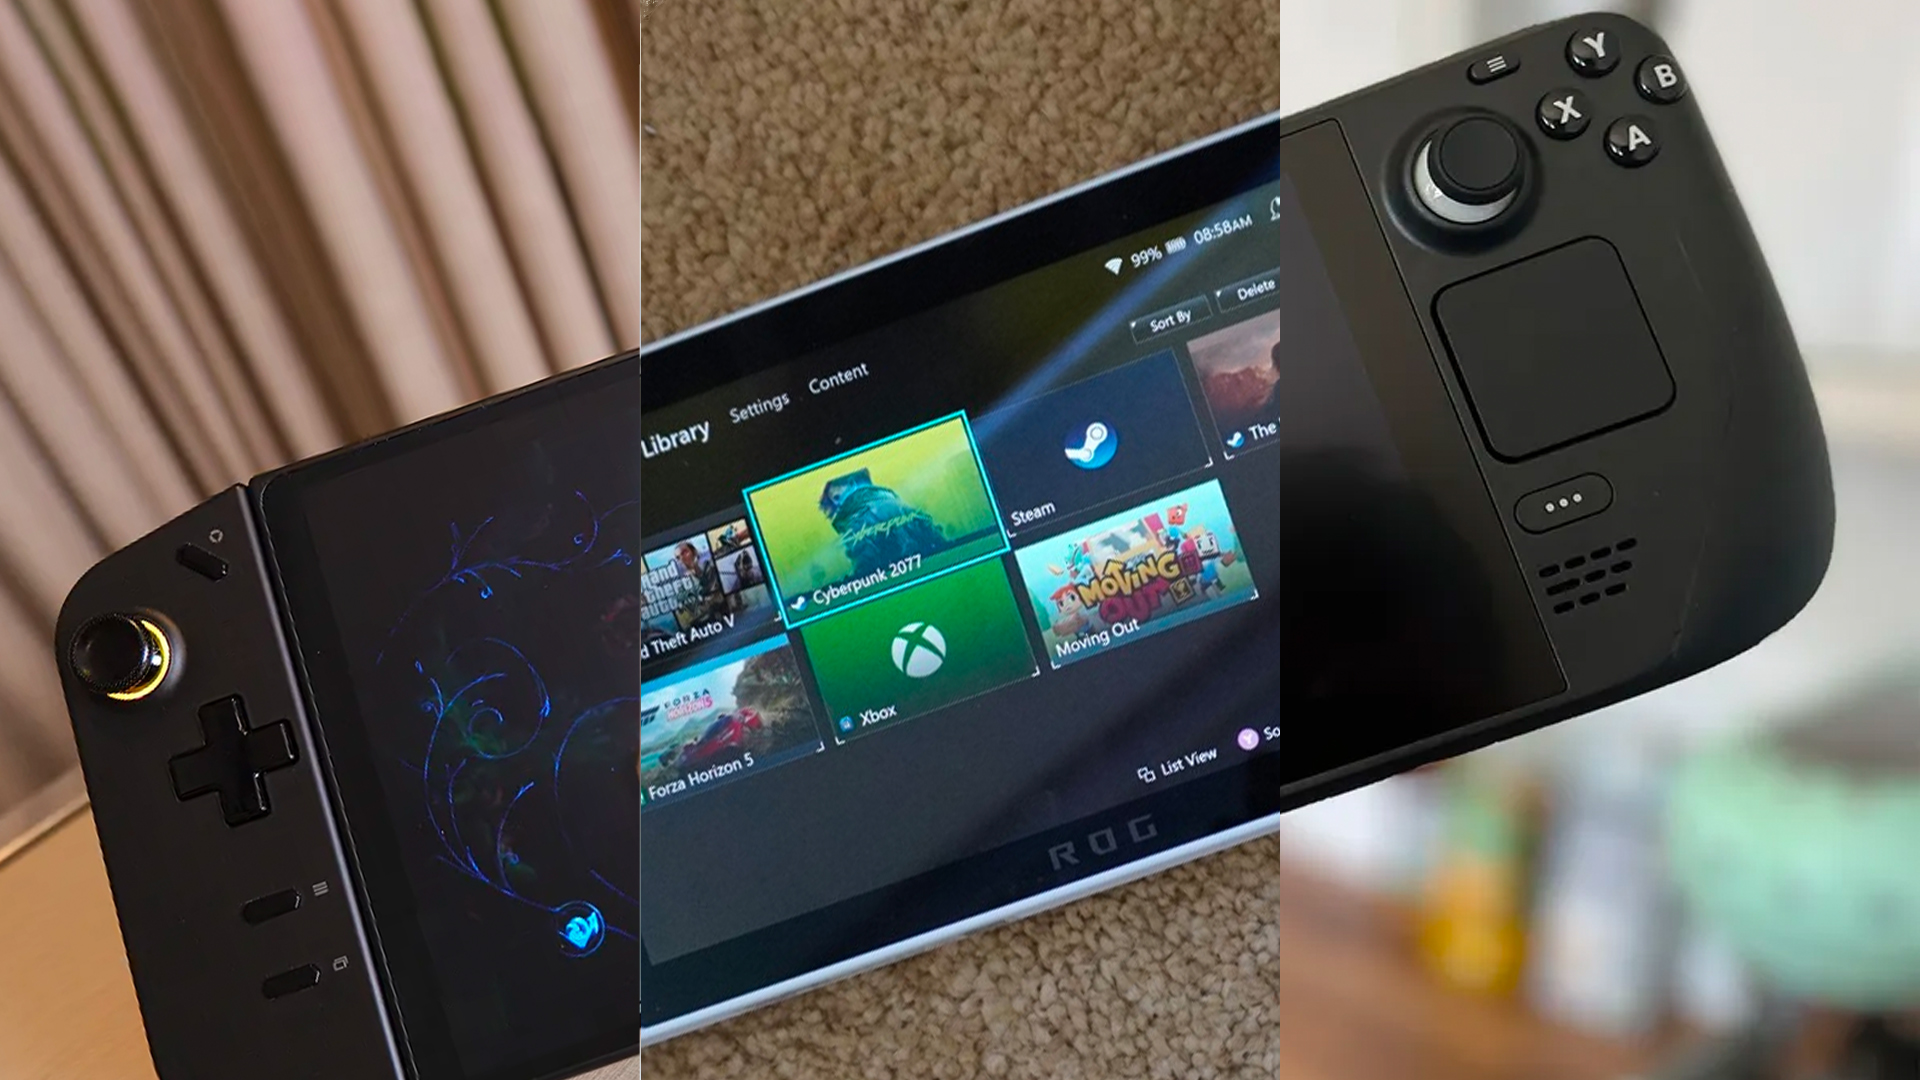 Lenovo Legion Go review: How does it compare to Steam Deck, Asus